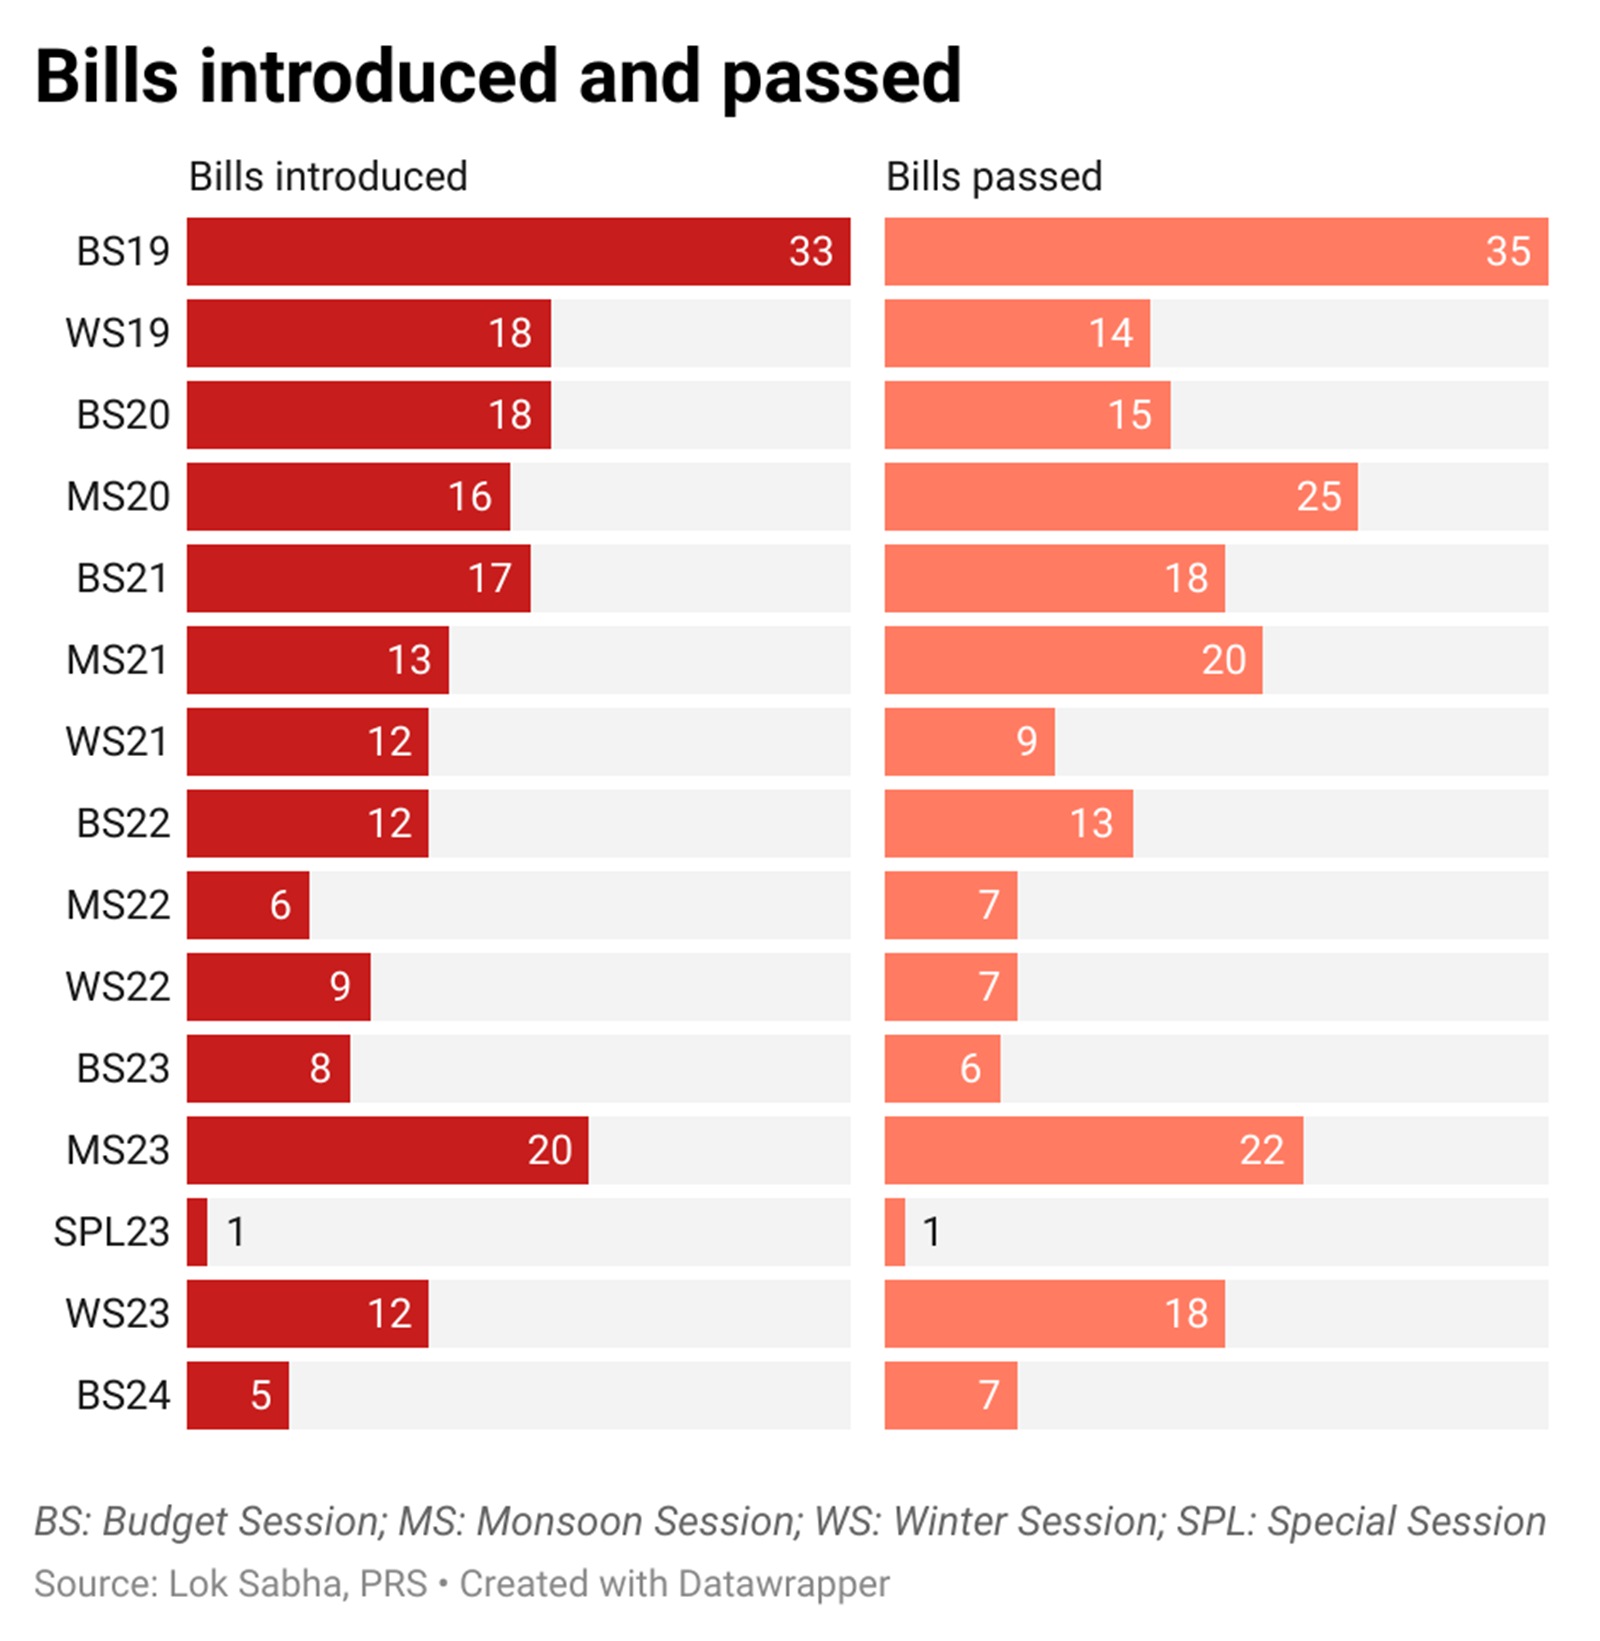 Bills introduced and passed